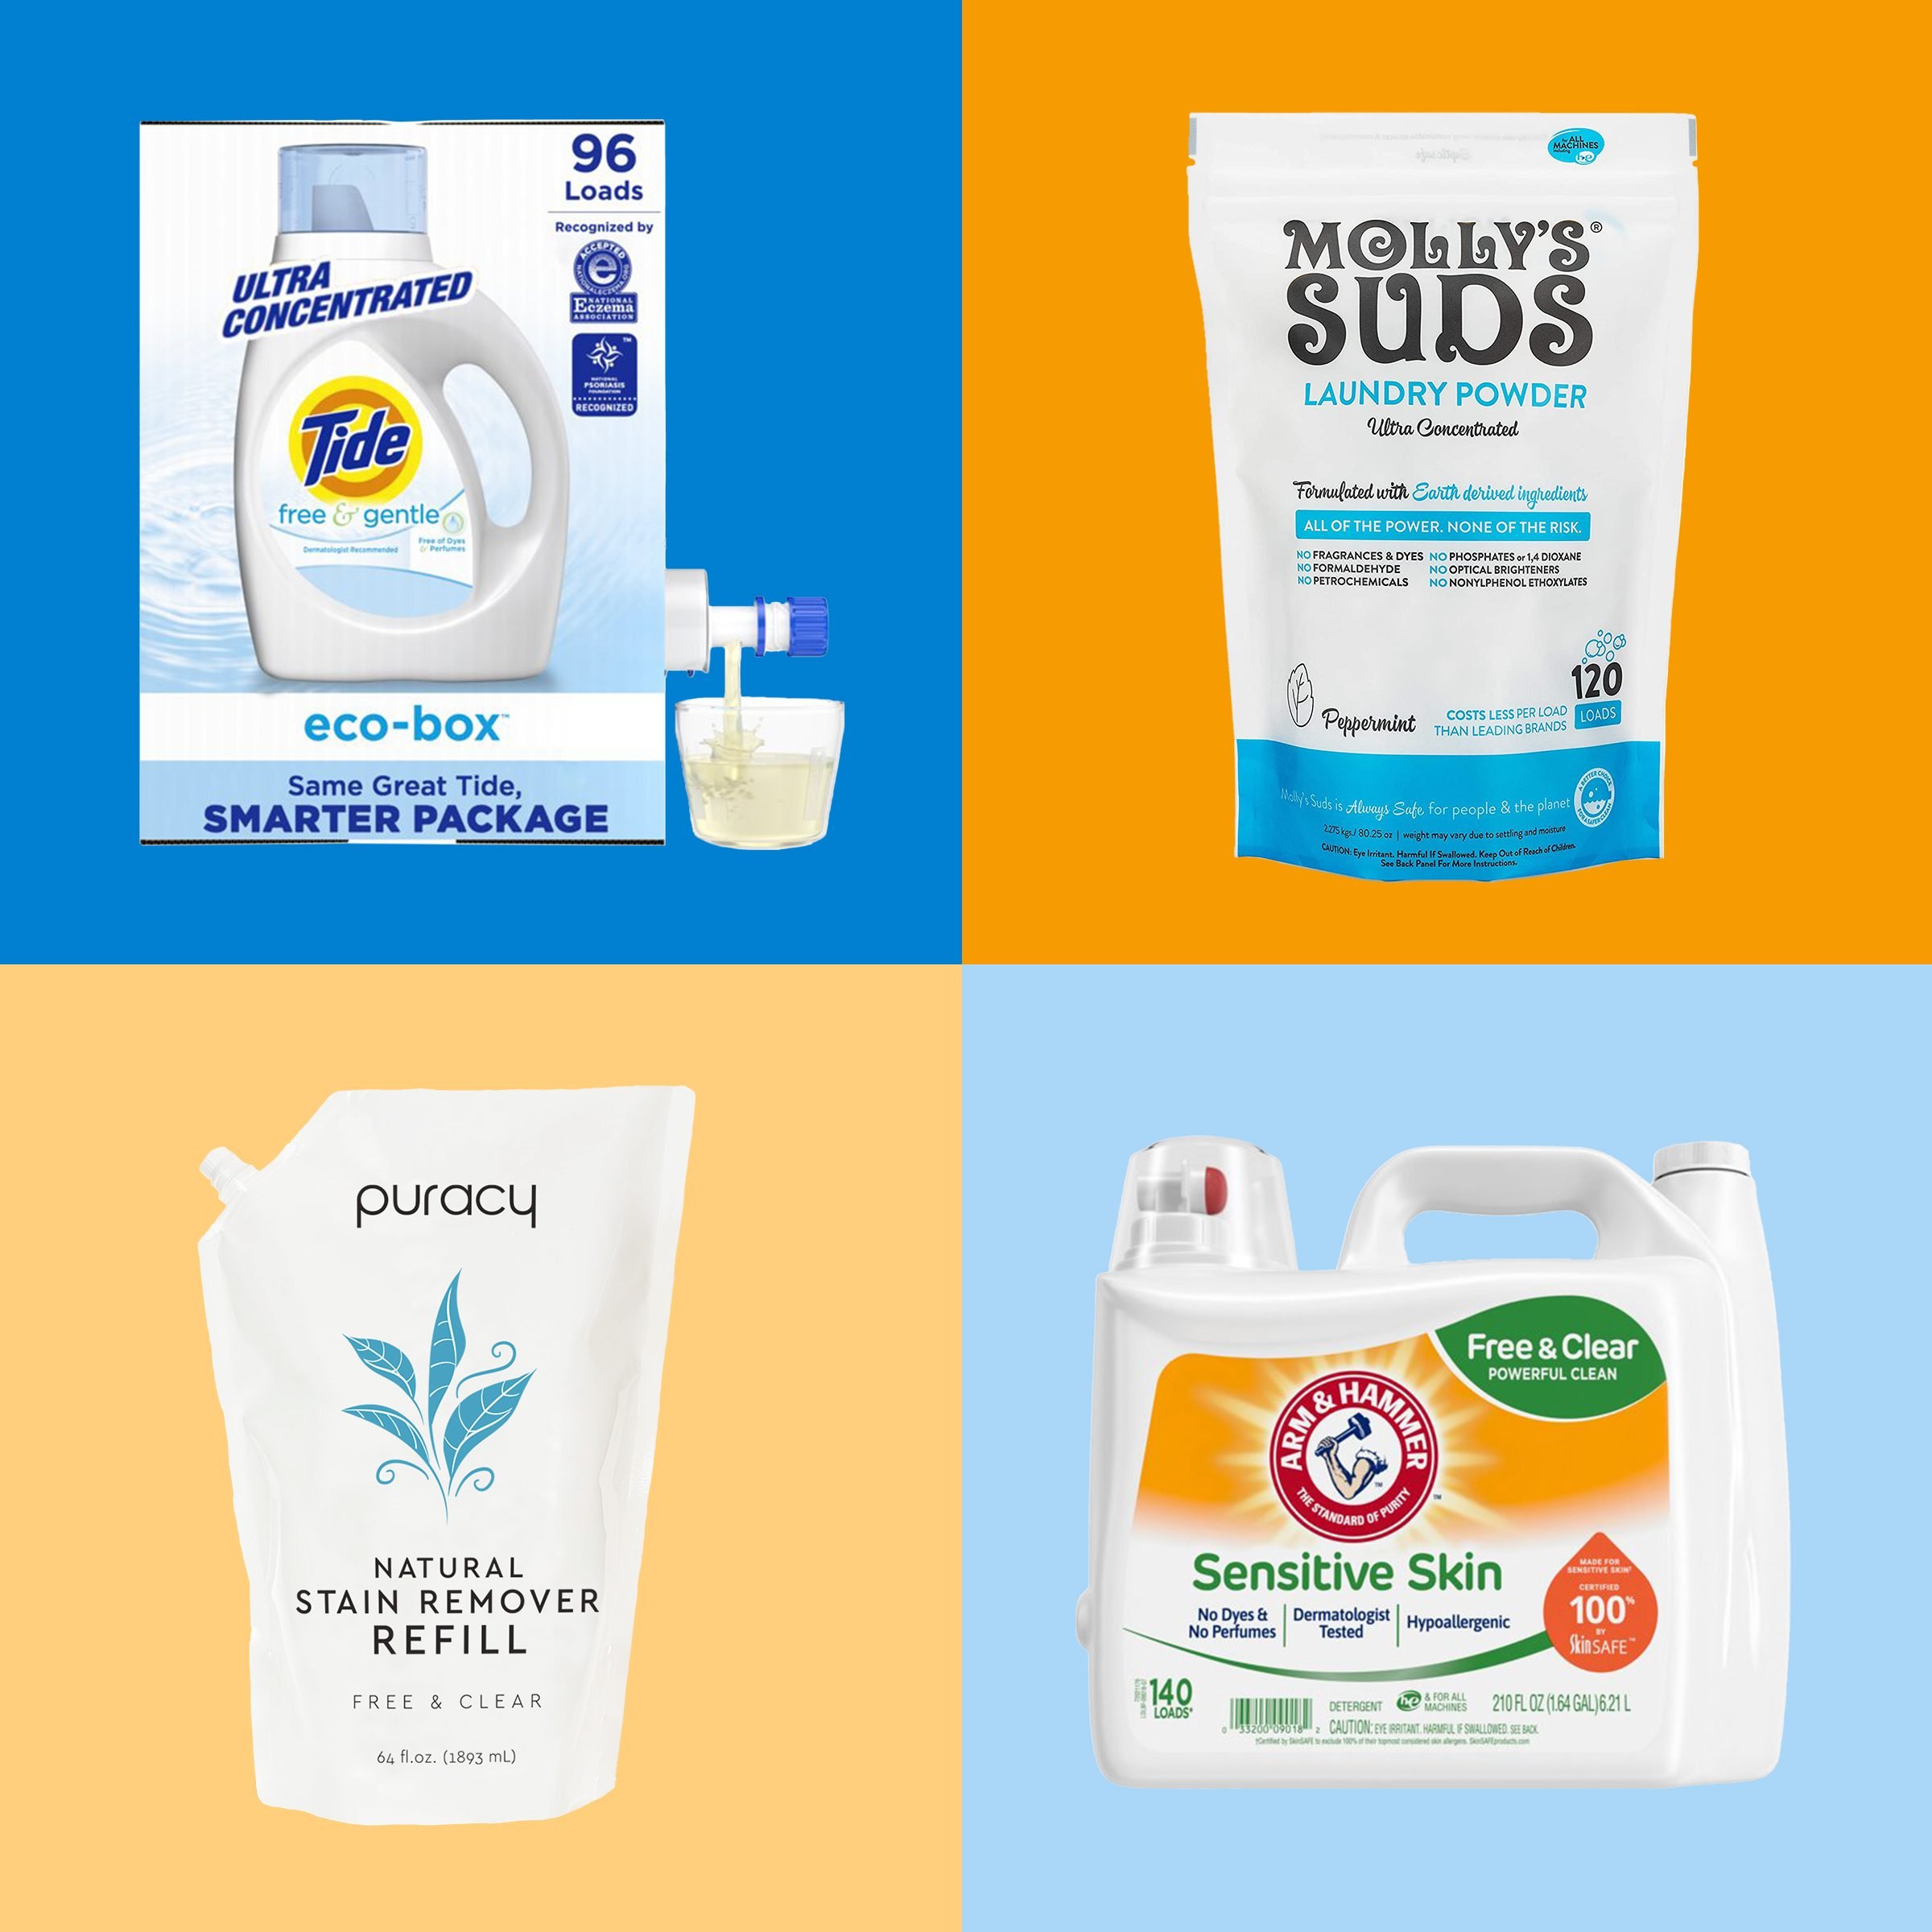 9 Best Laundry Detergent Sheets According To Reviews - The Eco Hub